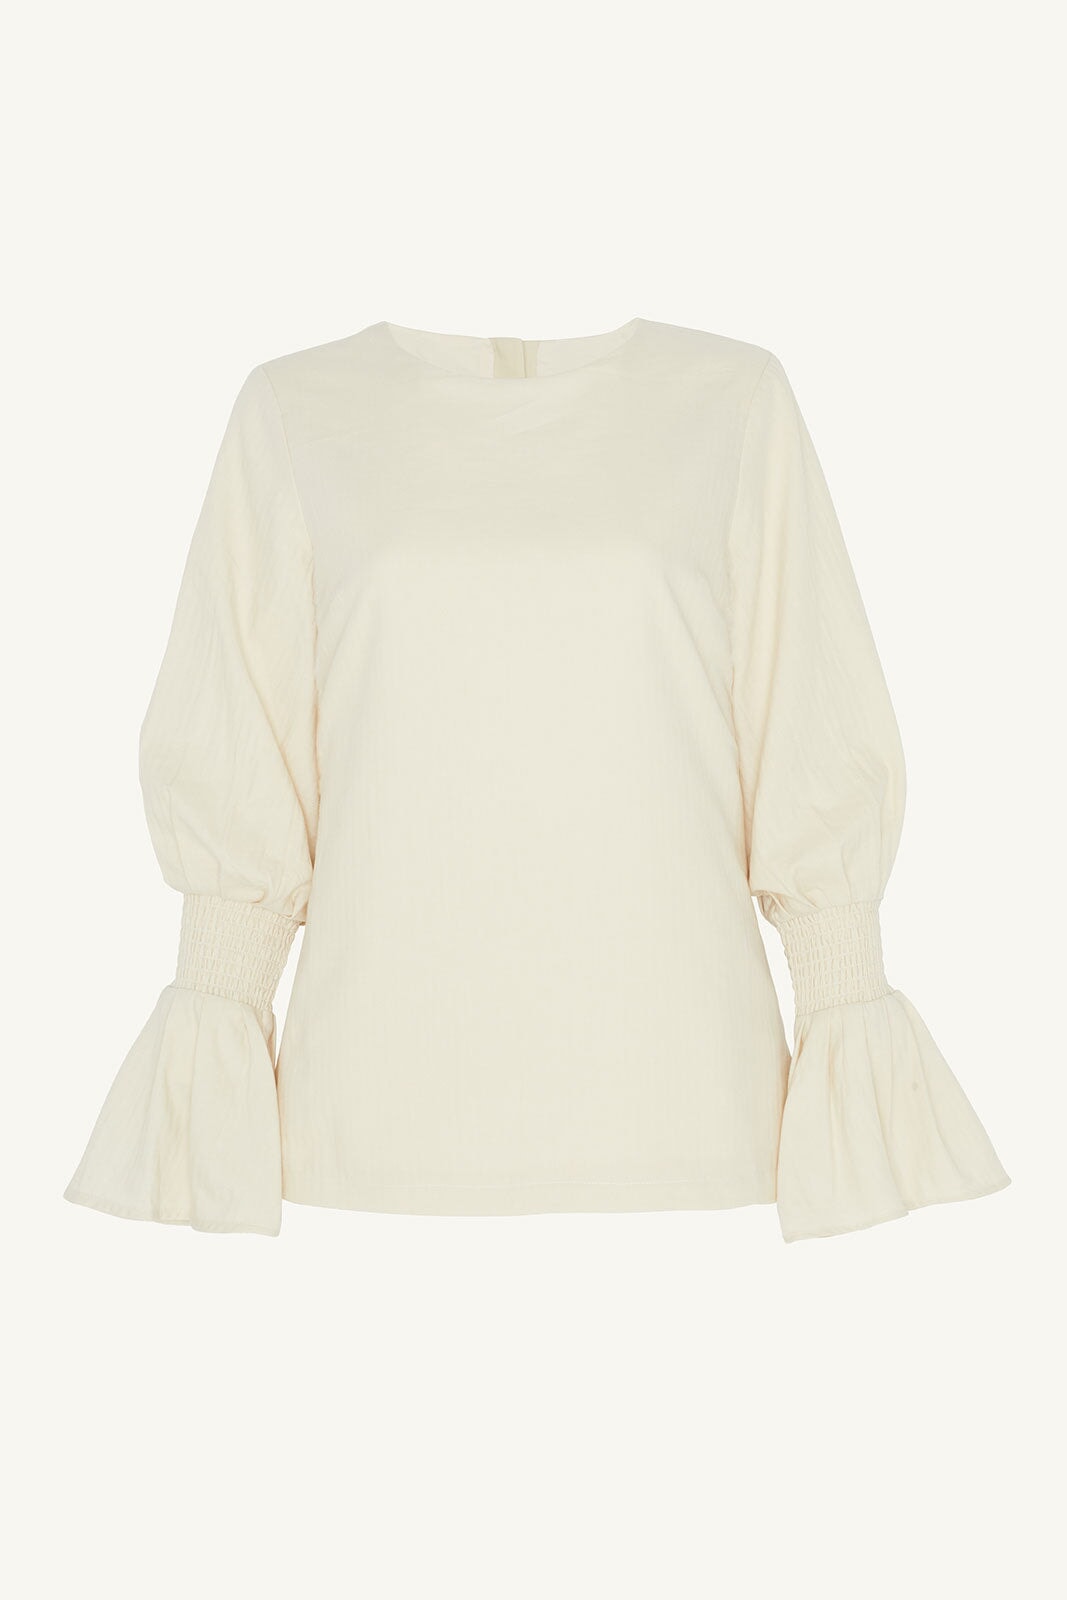 Bea Bell Sleeve Top - Off White Clothing epschoolboard 